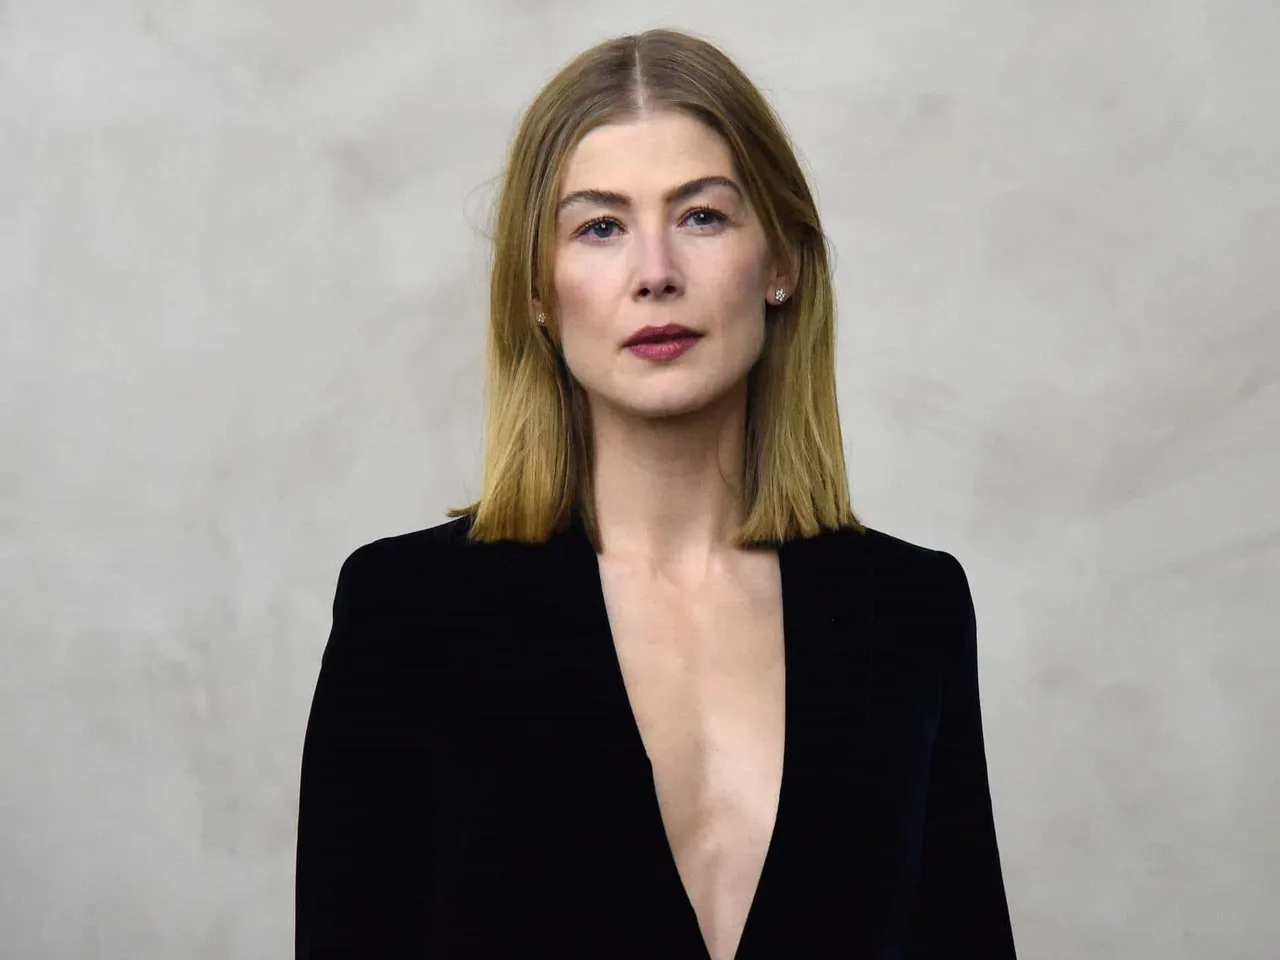 "Body-Tuning": Rosamund Pike Spoke Out About Being Photoshopped For Movie Posters